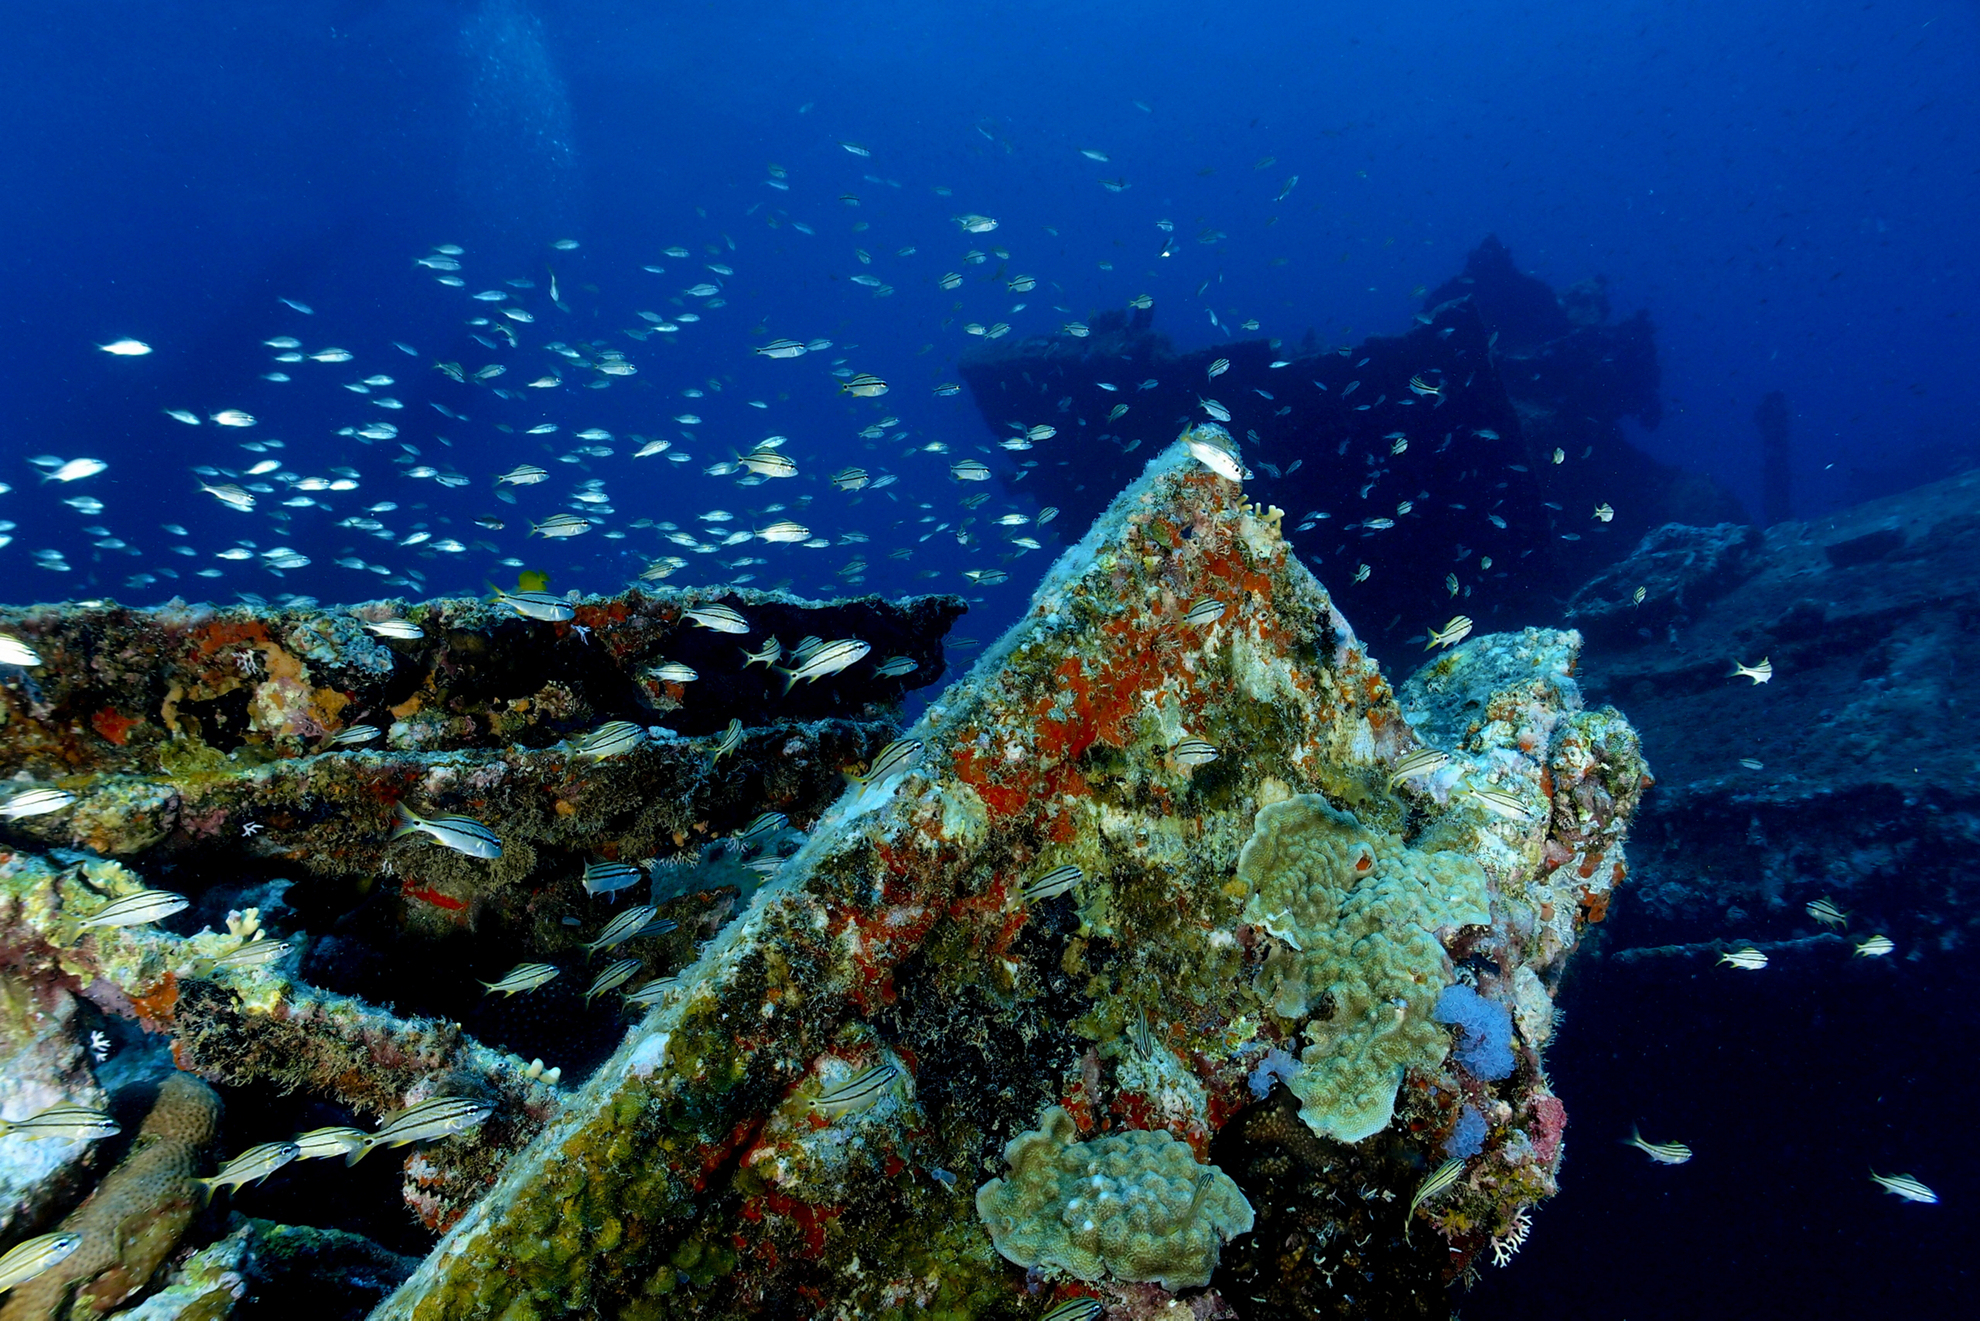 The SS Antilla shipwreck in Aruba is one of the best places to snorkel in the Caribbean